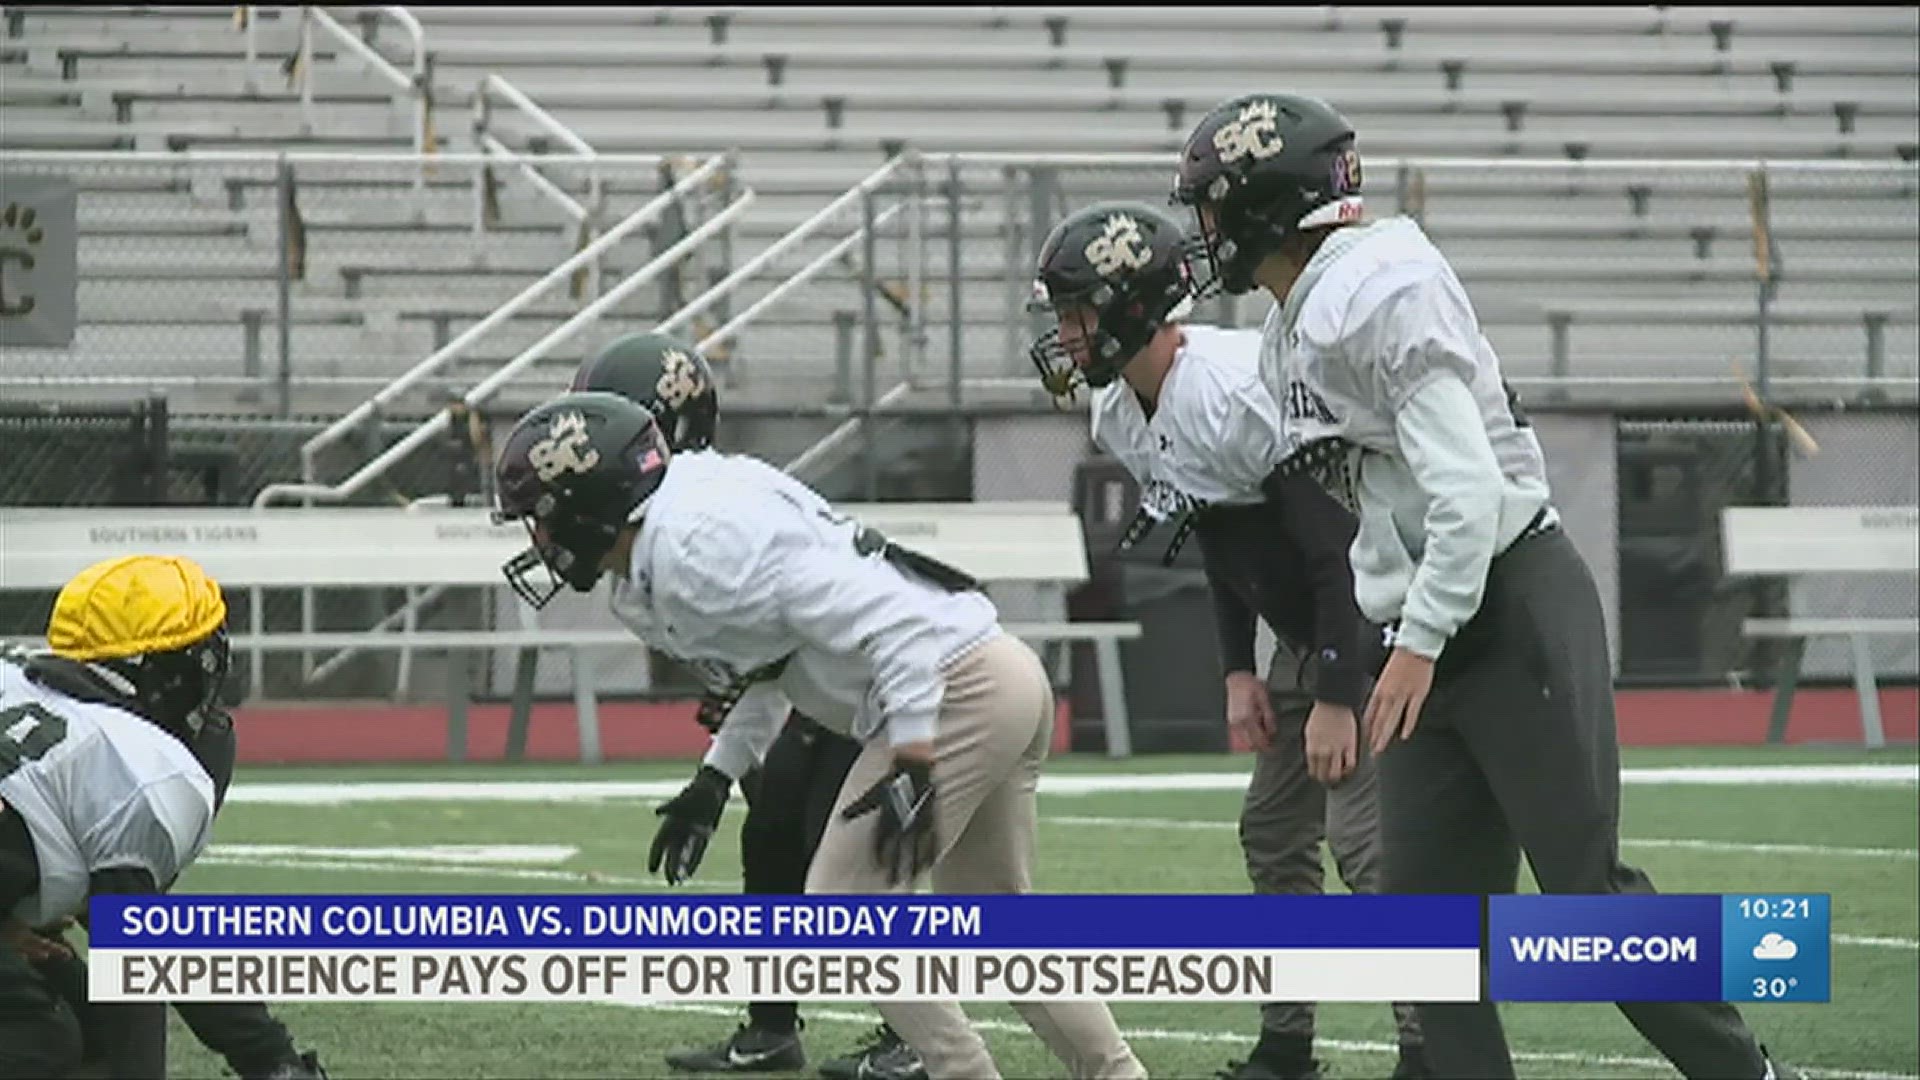 December football is the standard at this point for Southern Columbia. The Tigers in the state semifinals once again trying to win their 7th straight state title.